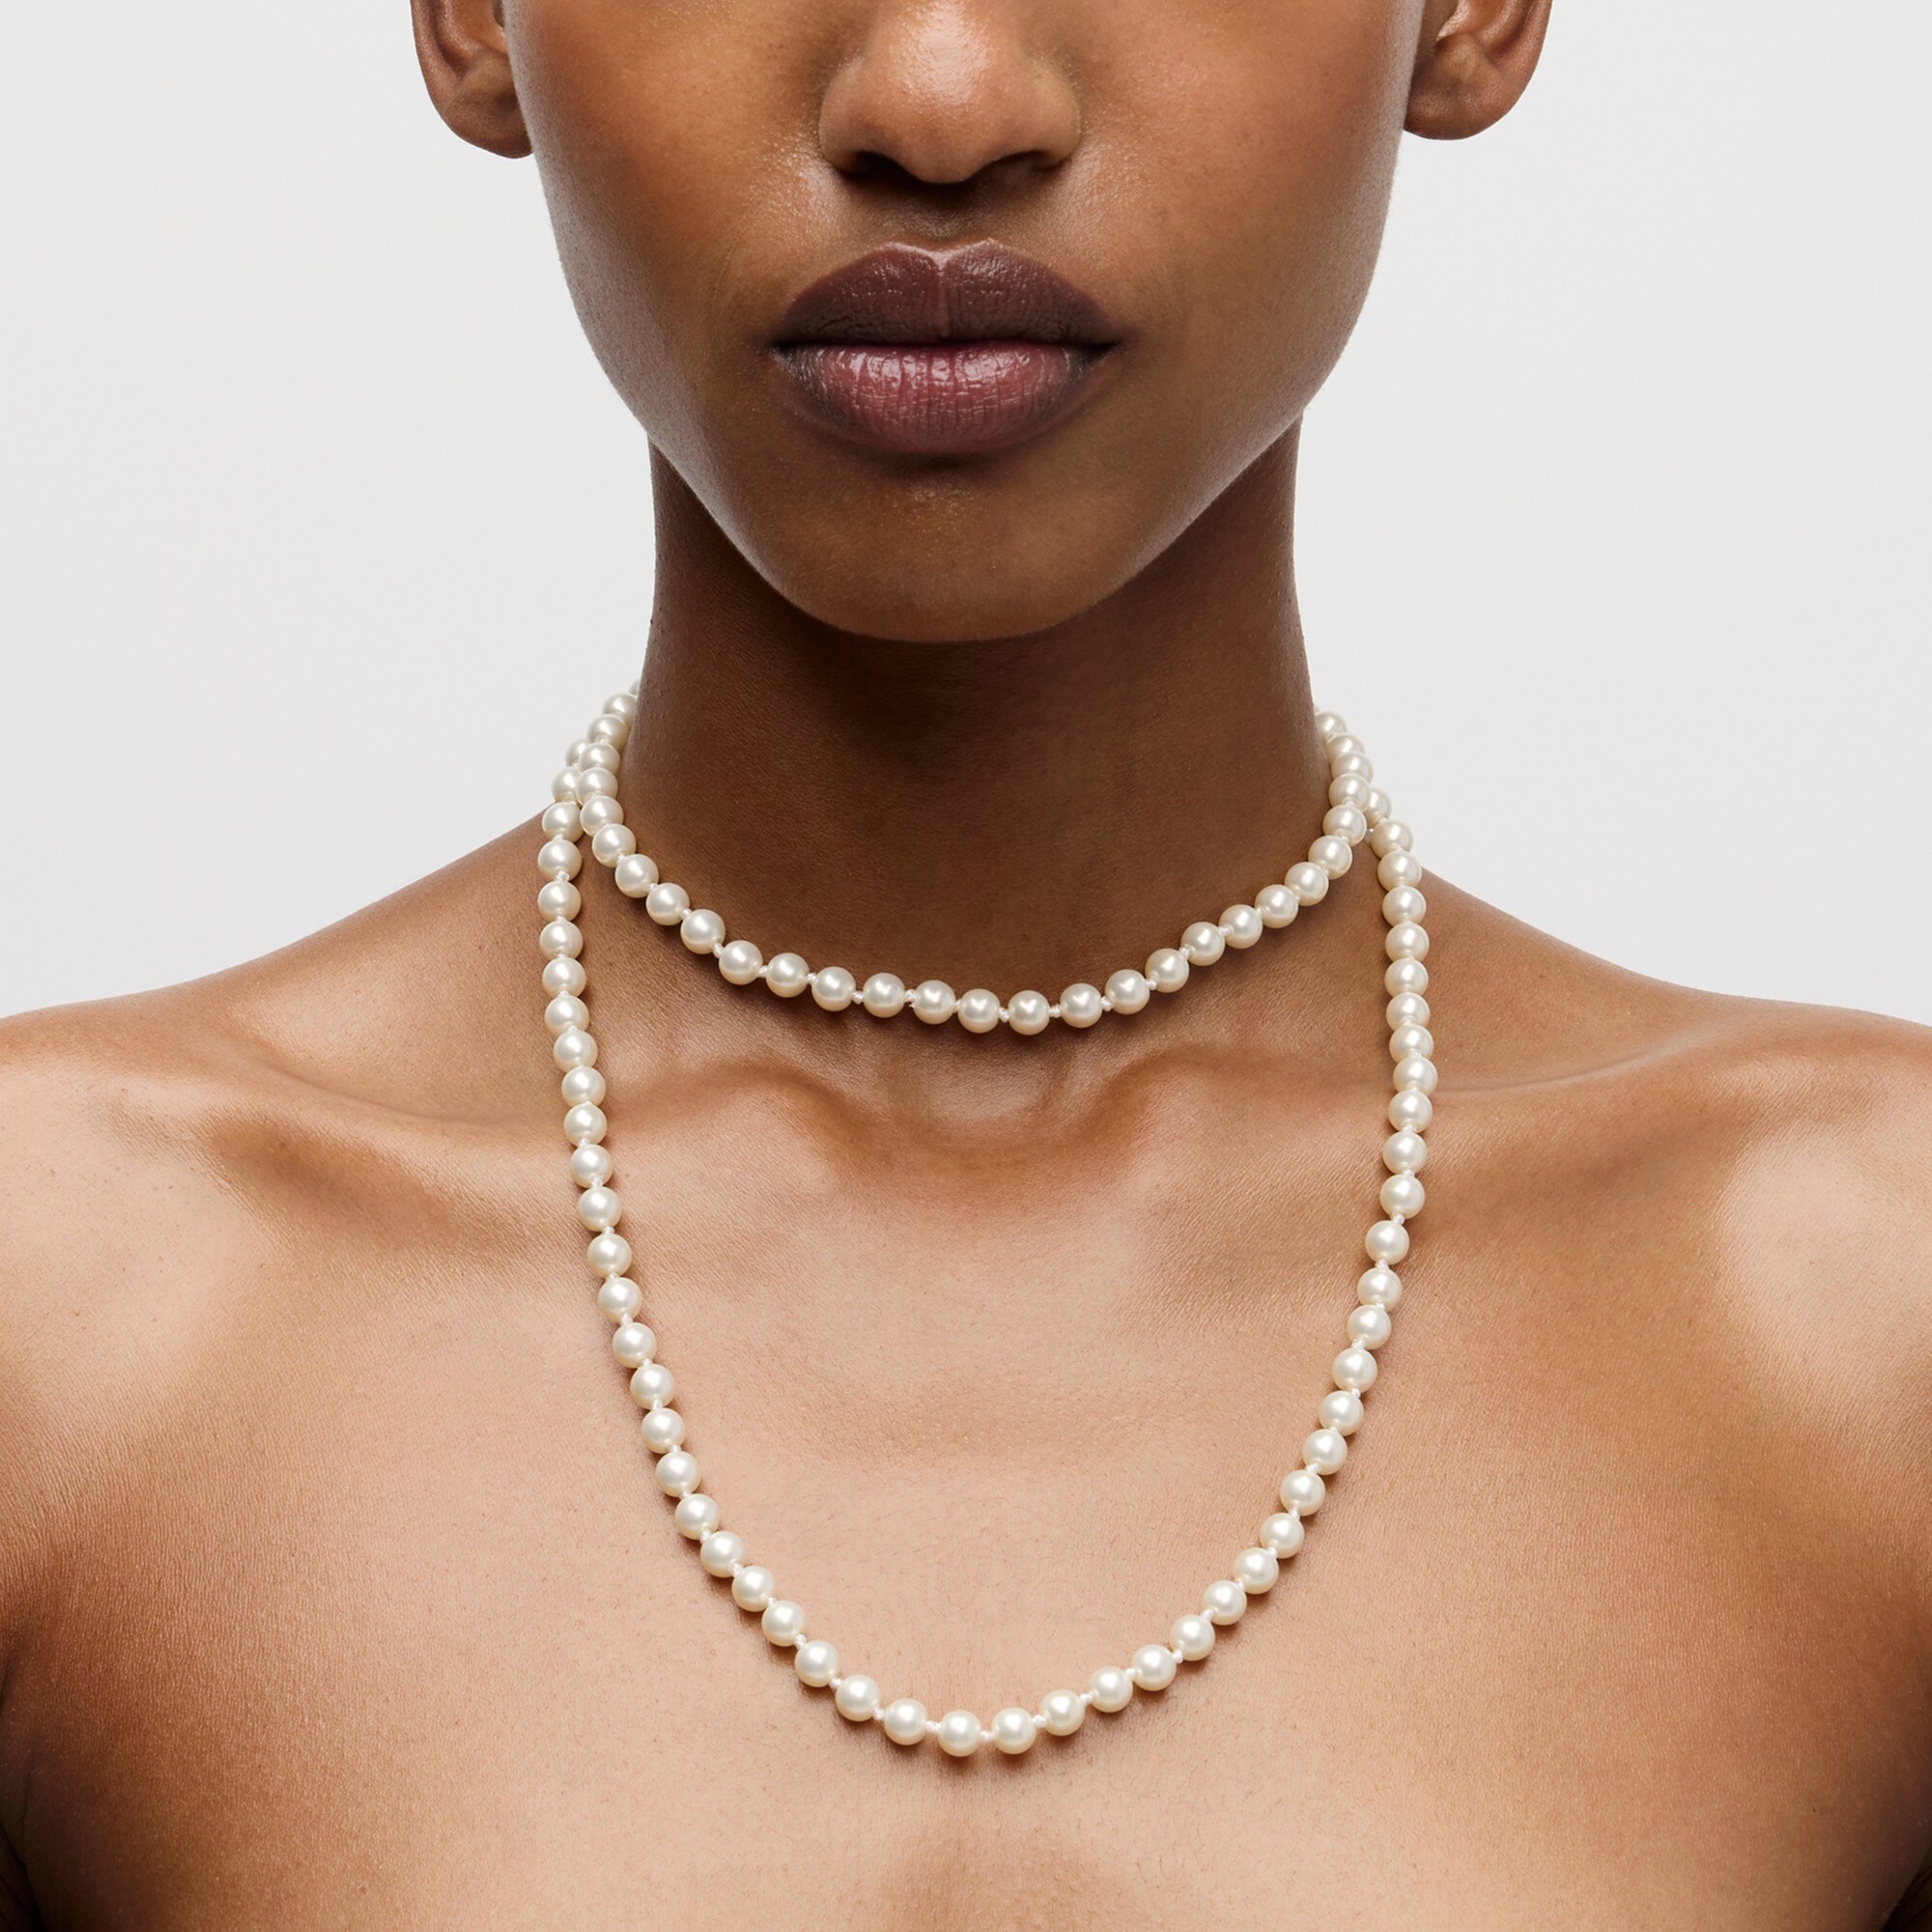  Long pearl necklace